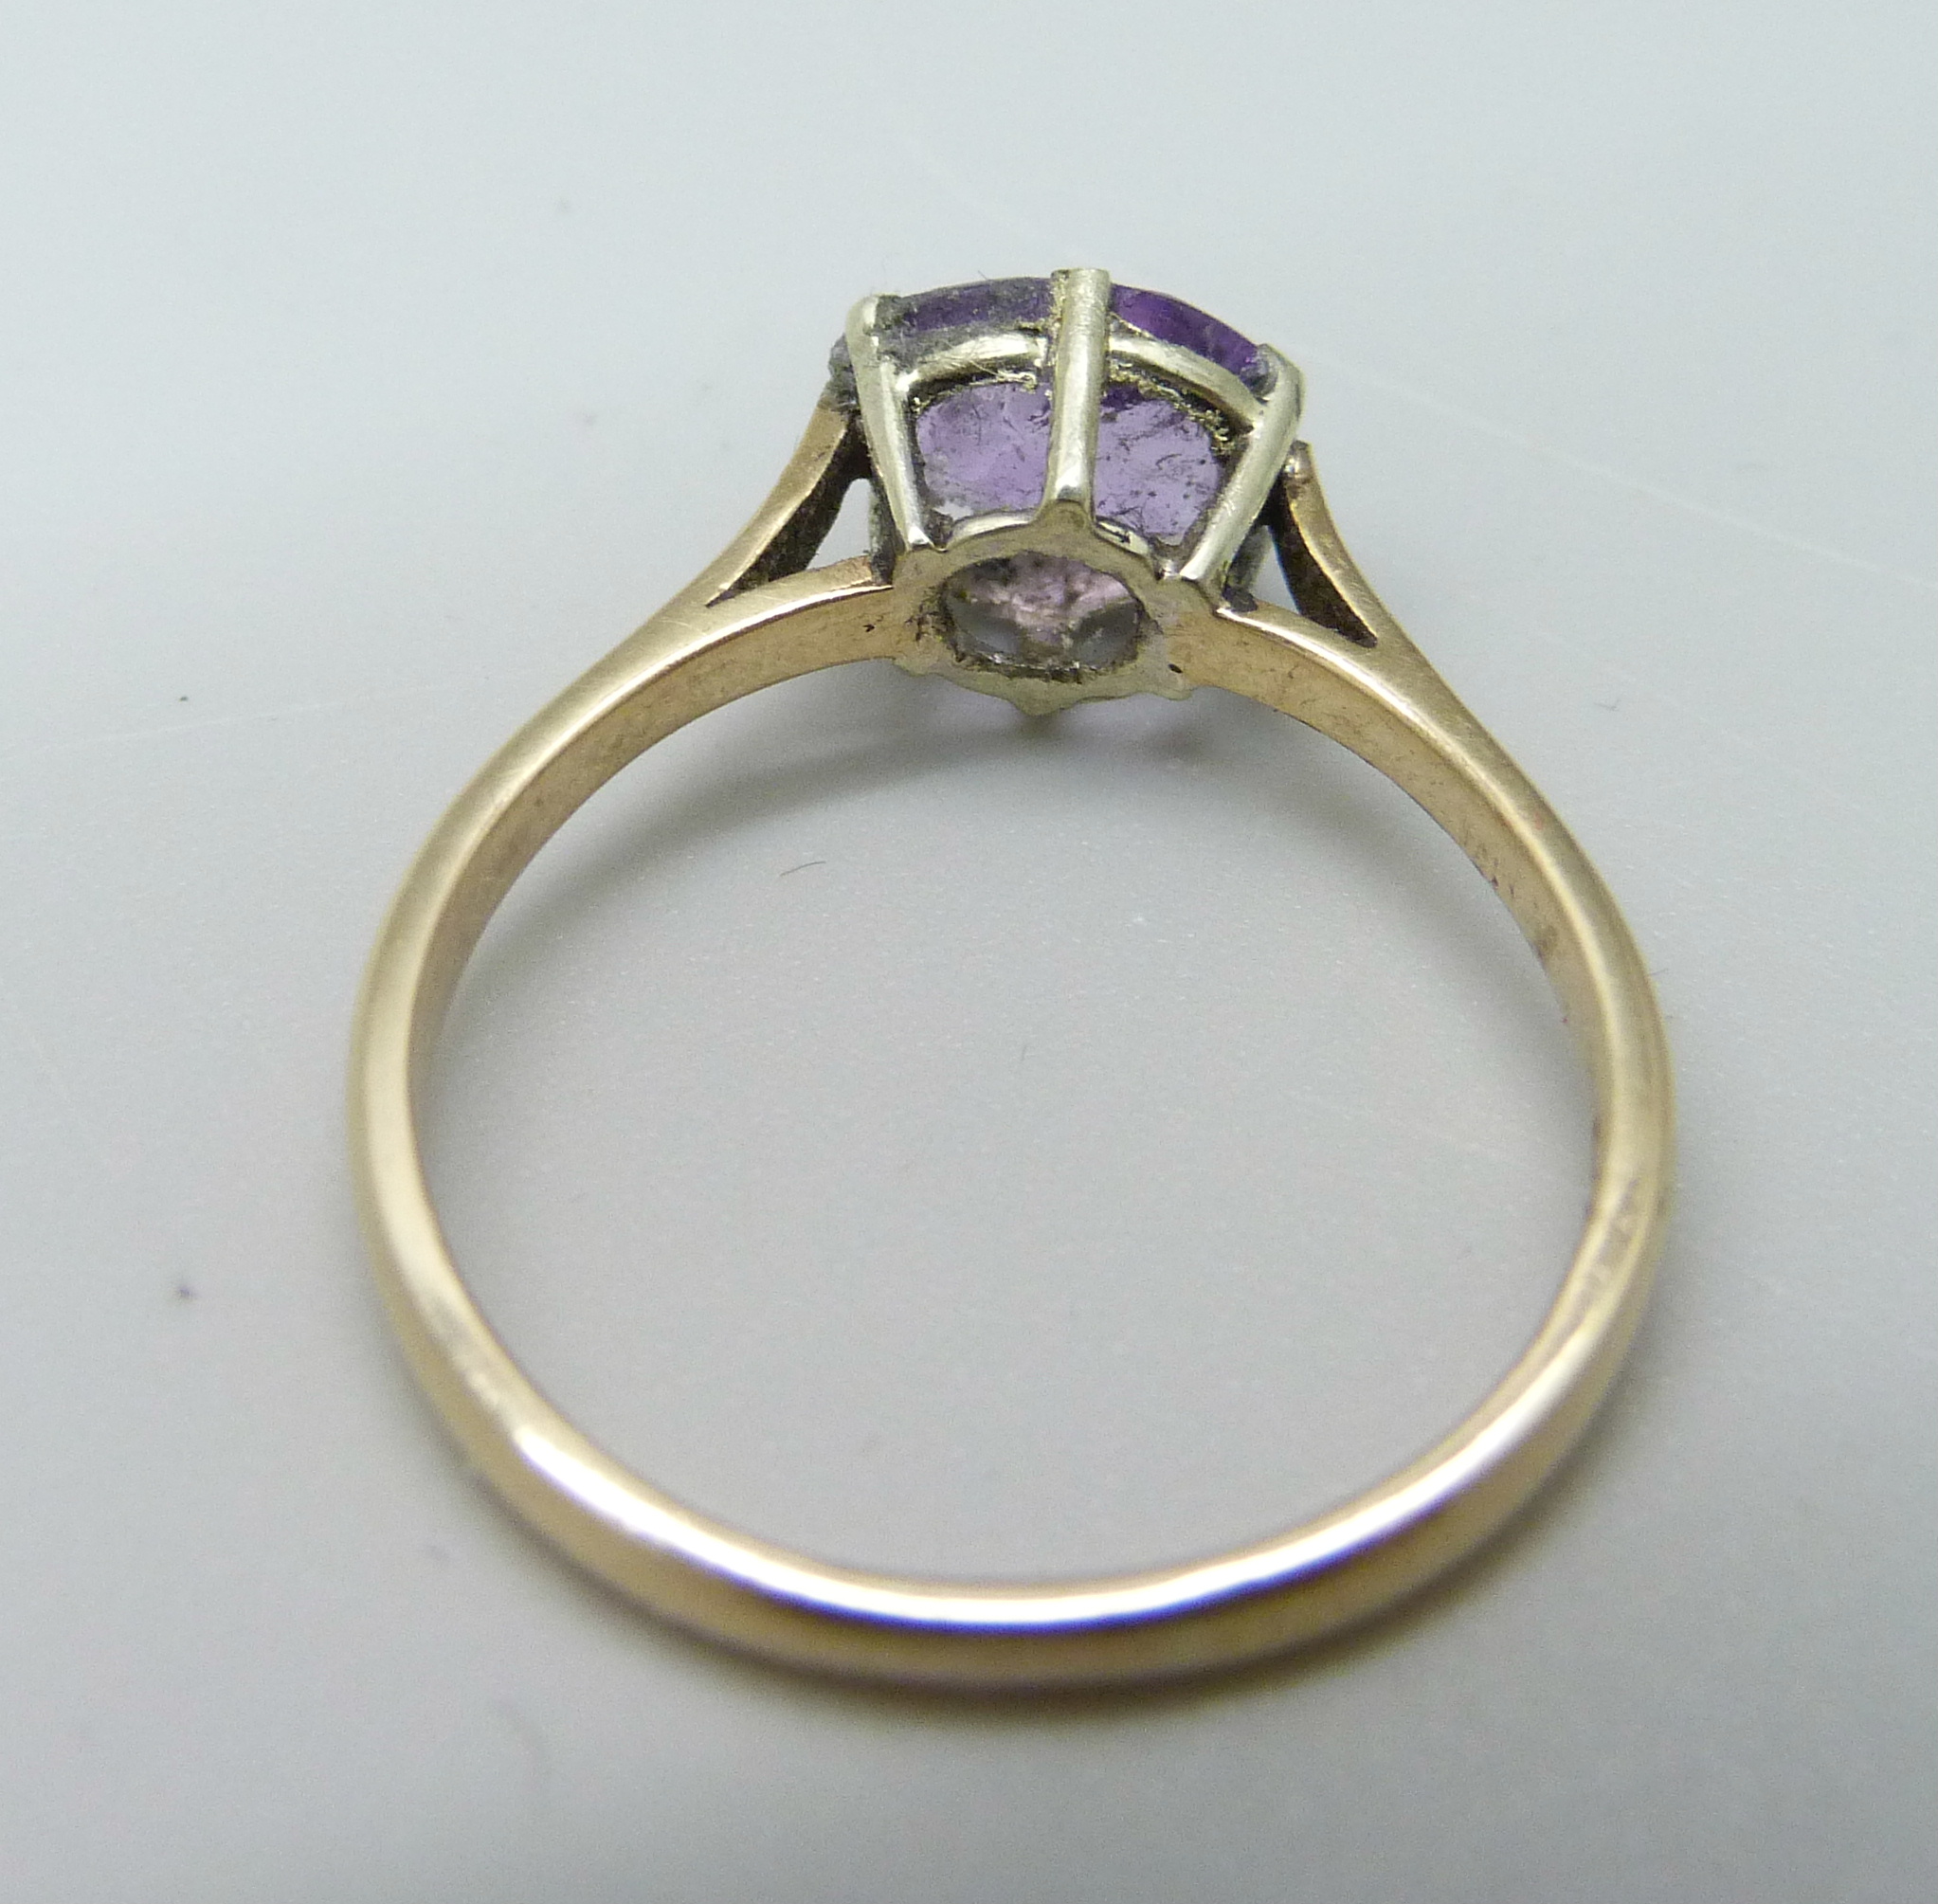 A 9ct gold amethyst solitaire ring, 1.9g, P, a/f - Image 3 of 3